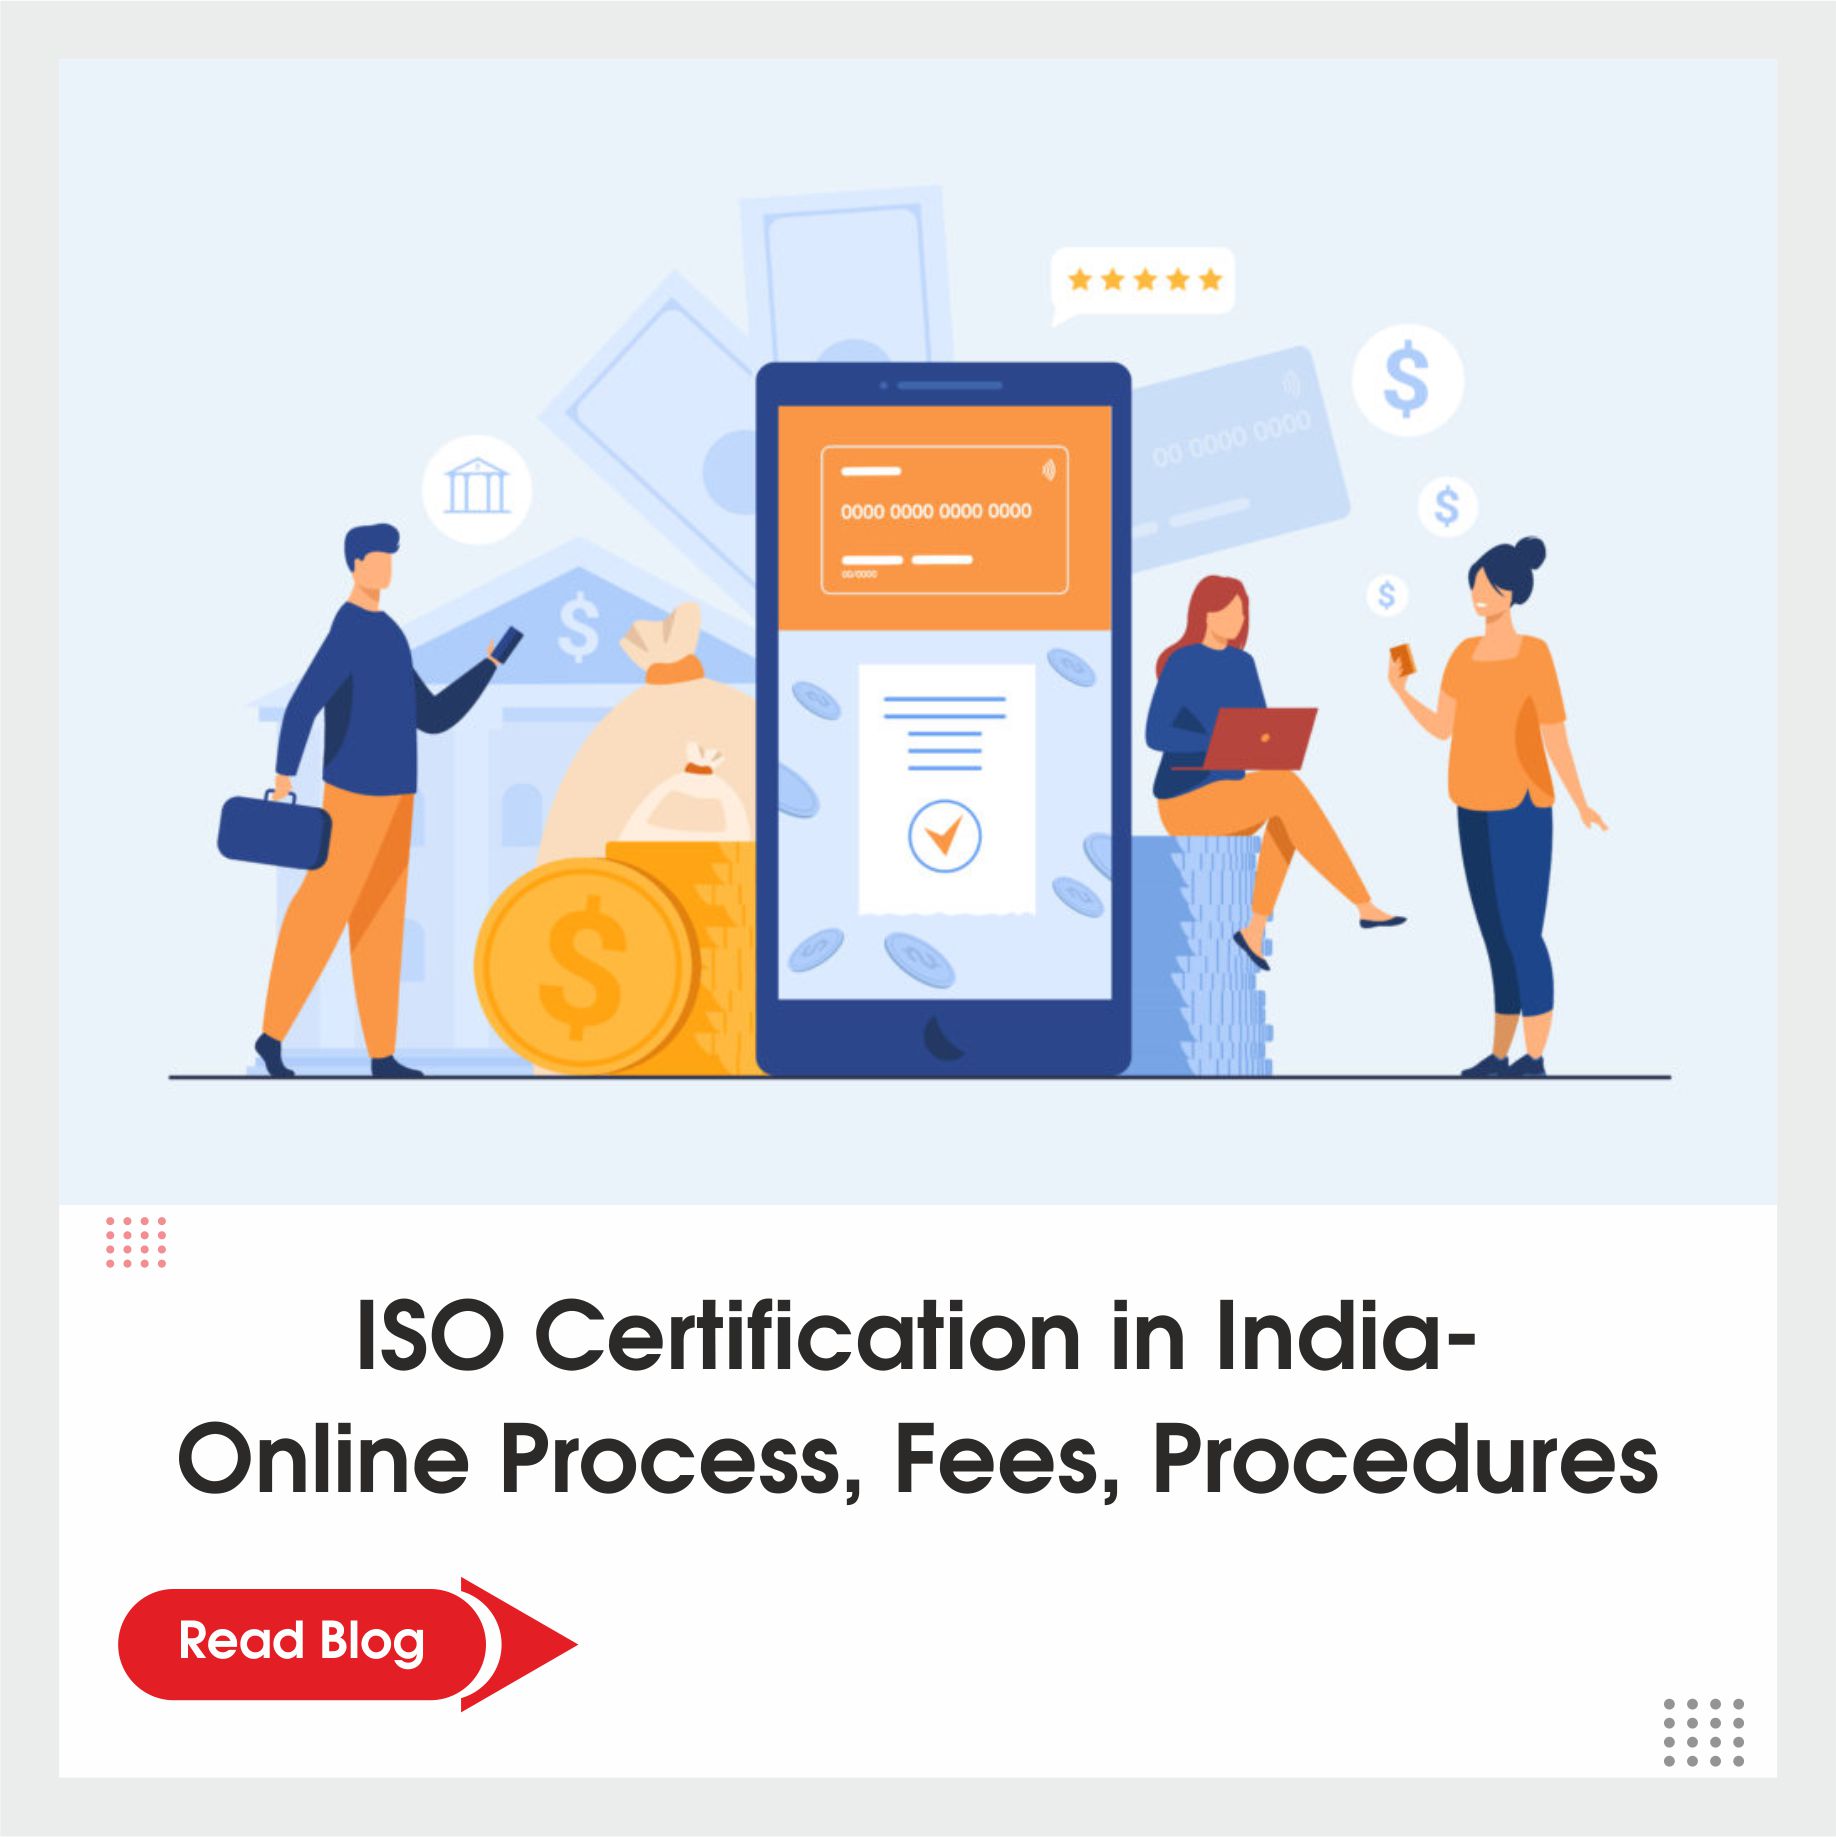 ISO Certification in India- Online Process, Fees, Procedures